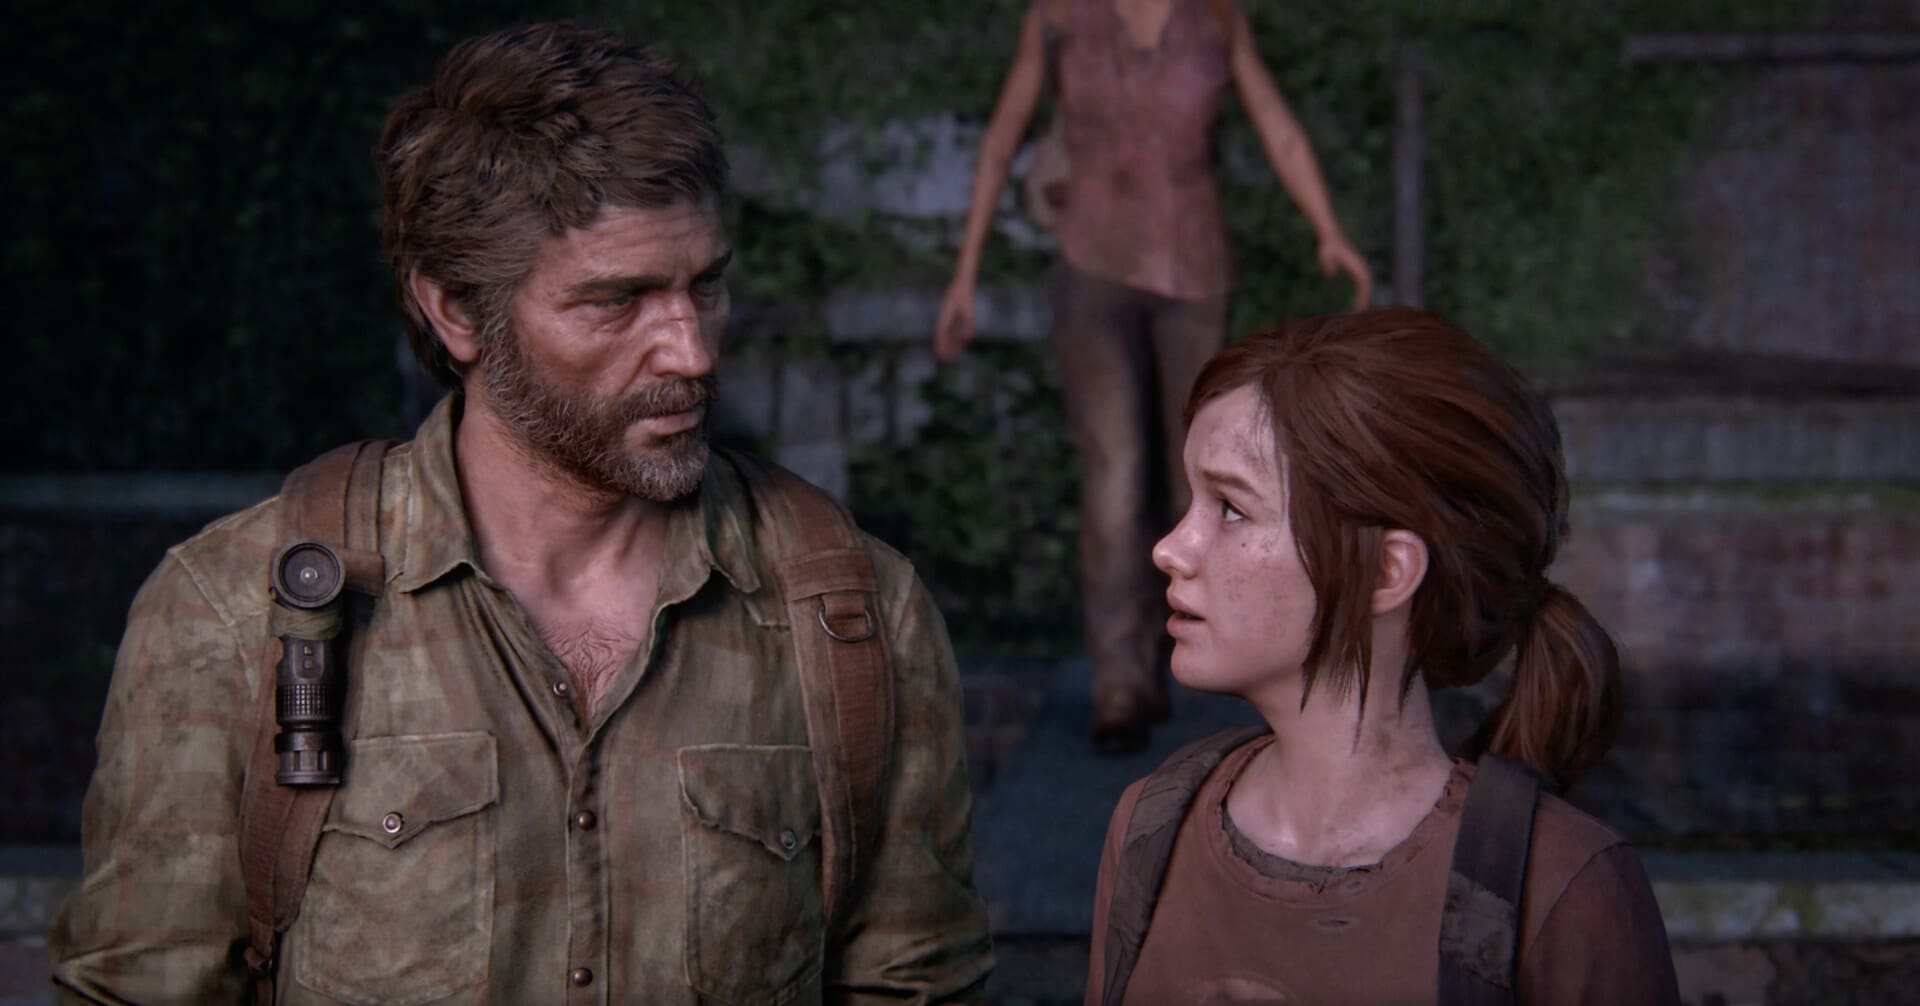 The Last Of US Part I, the-last-of-us-part-1, the-last-of-us, 2022